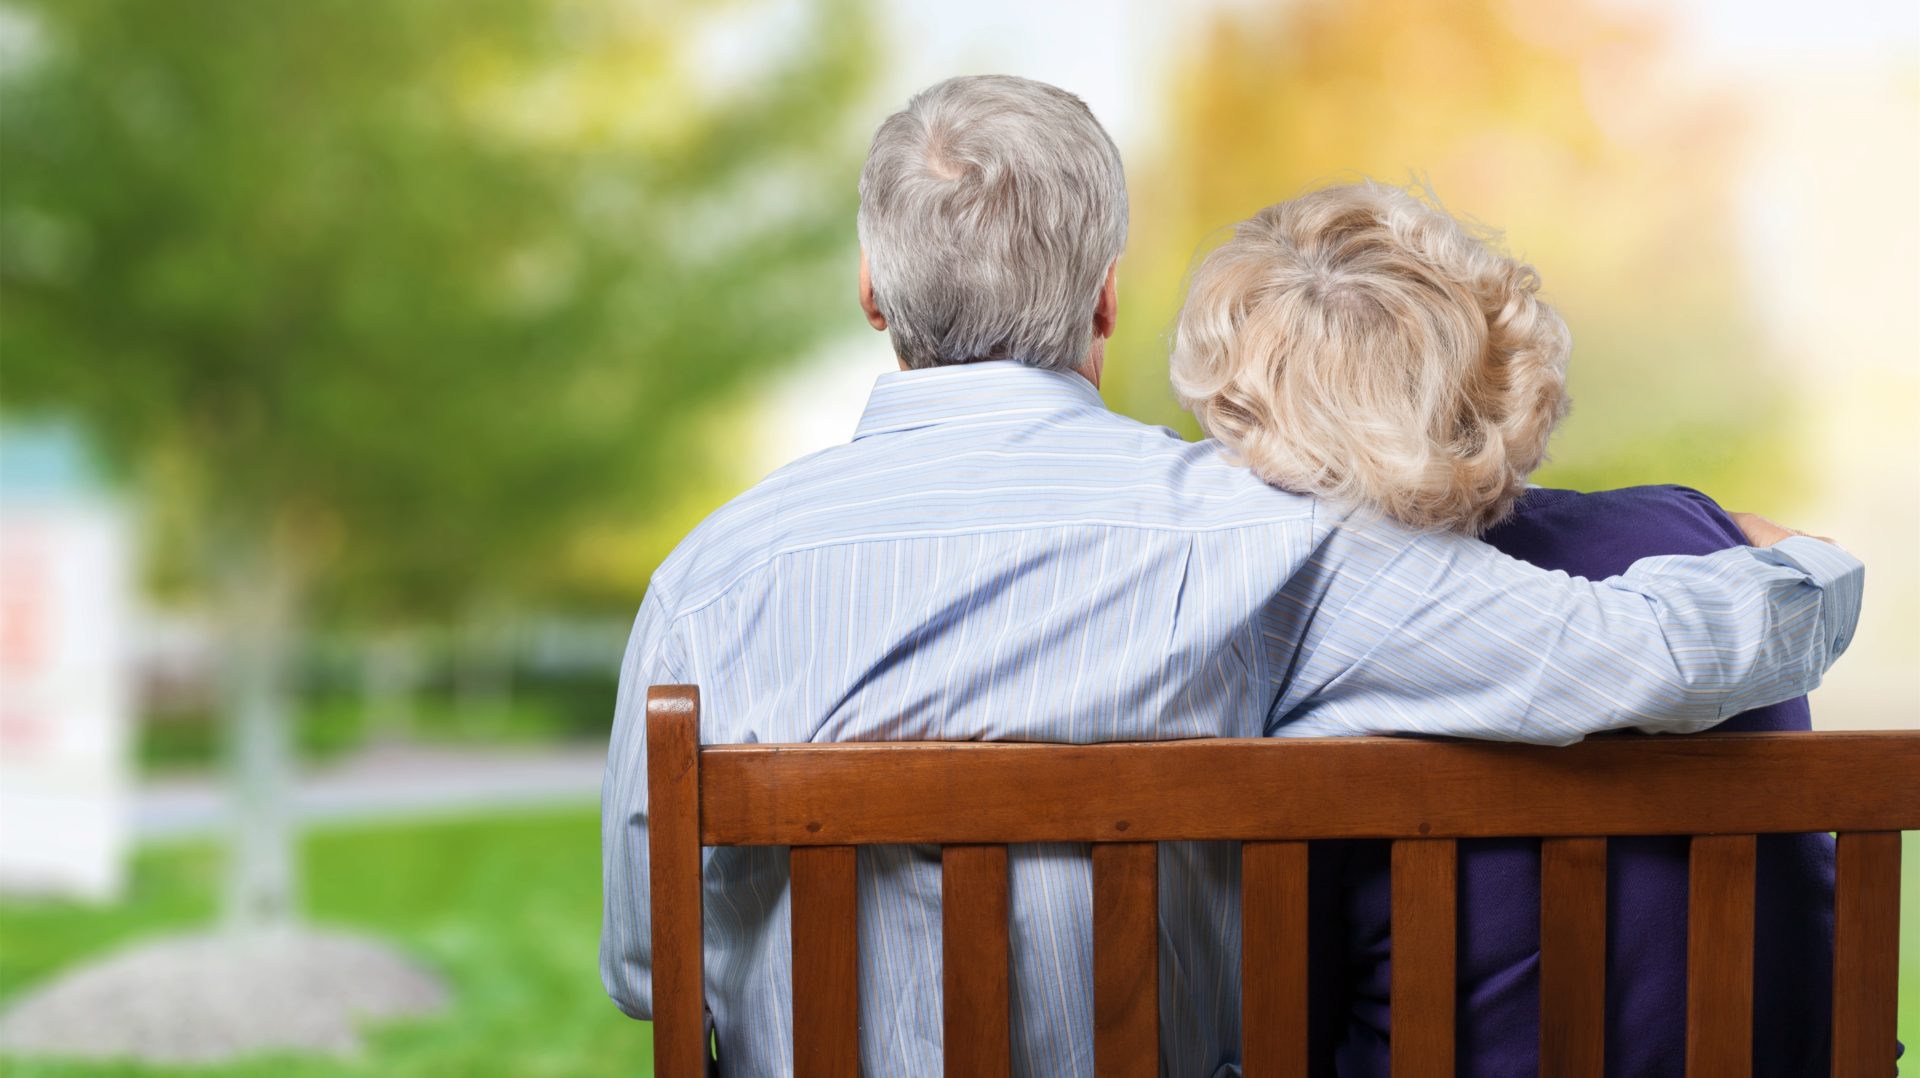 Monticello Trust Lawyer on How to Help Your Elderly Parent with Finances